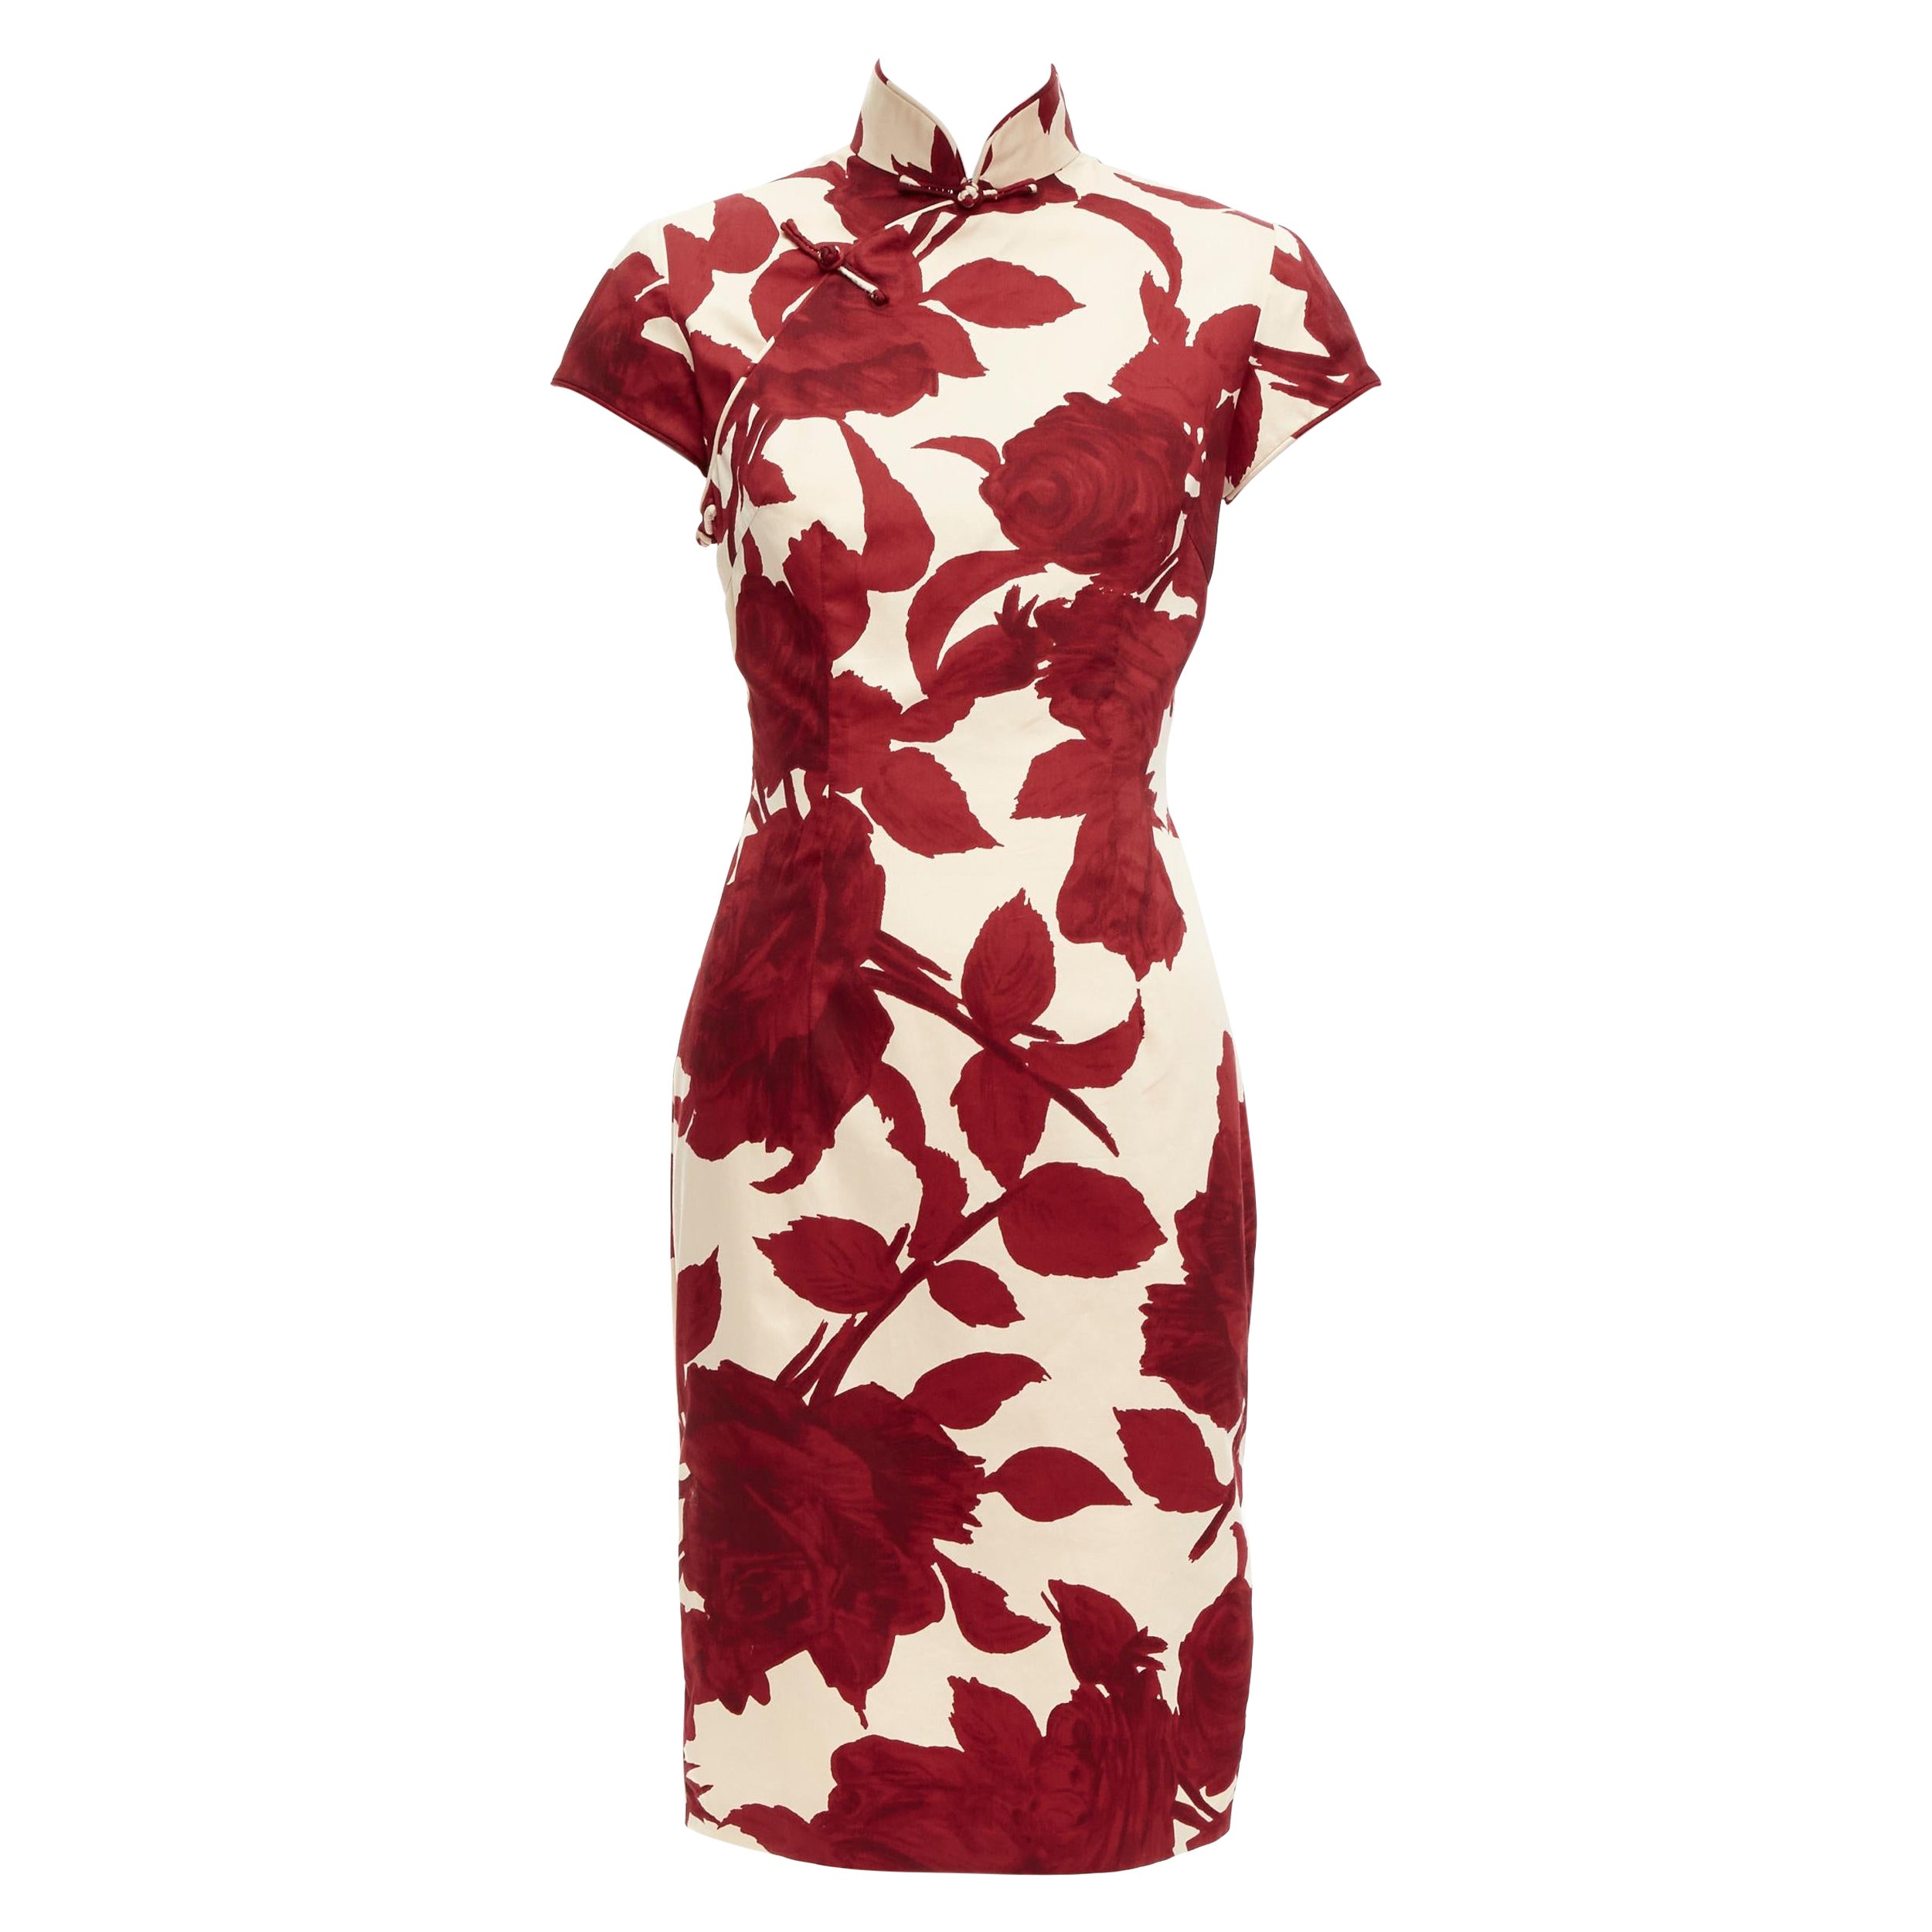 SHANGHAI TANG red beige rose floral print silk lined qipao dress UK6 XS For Sale